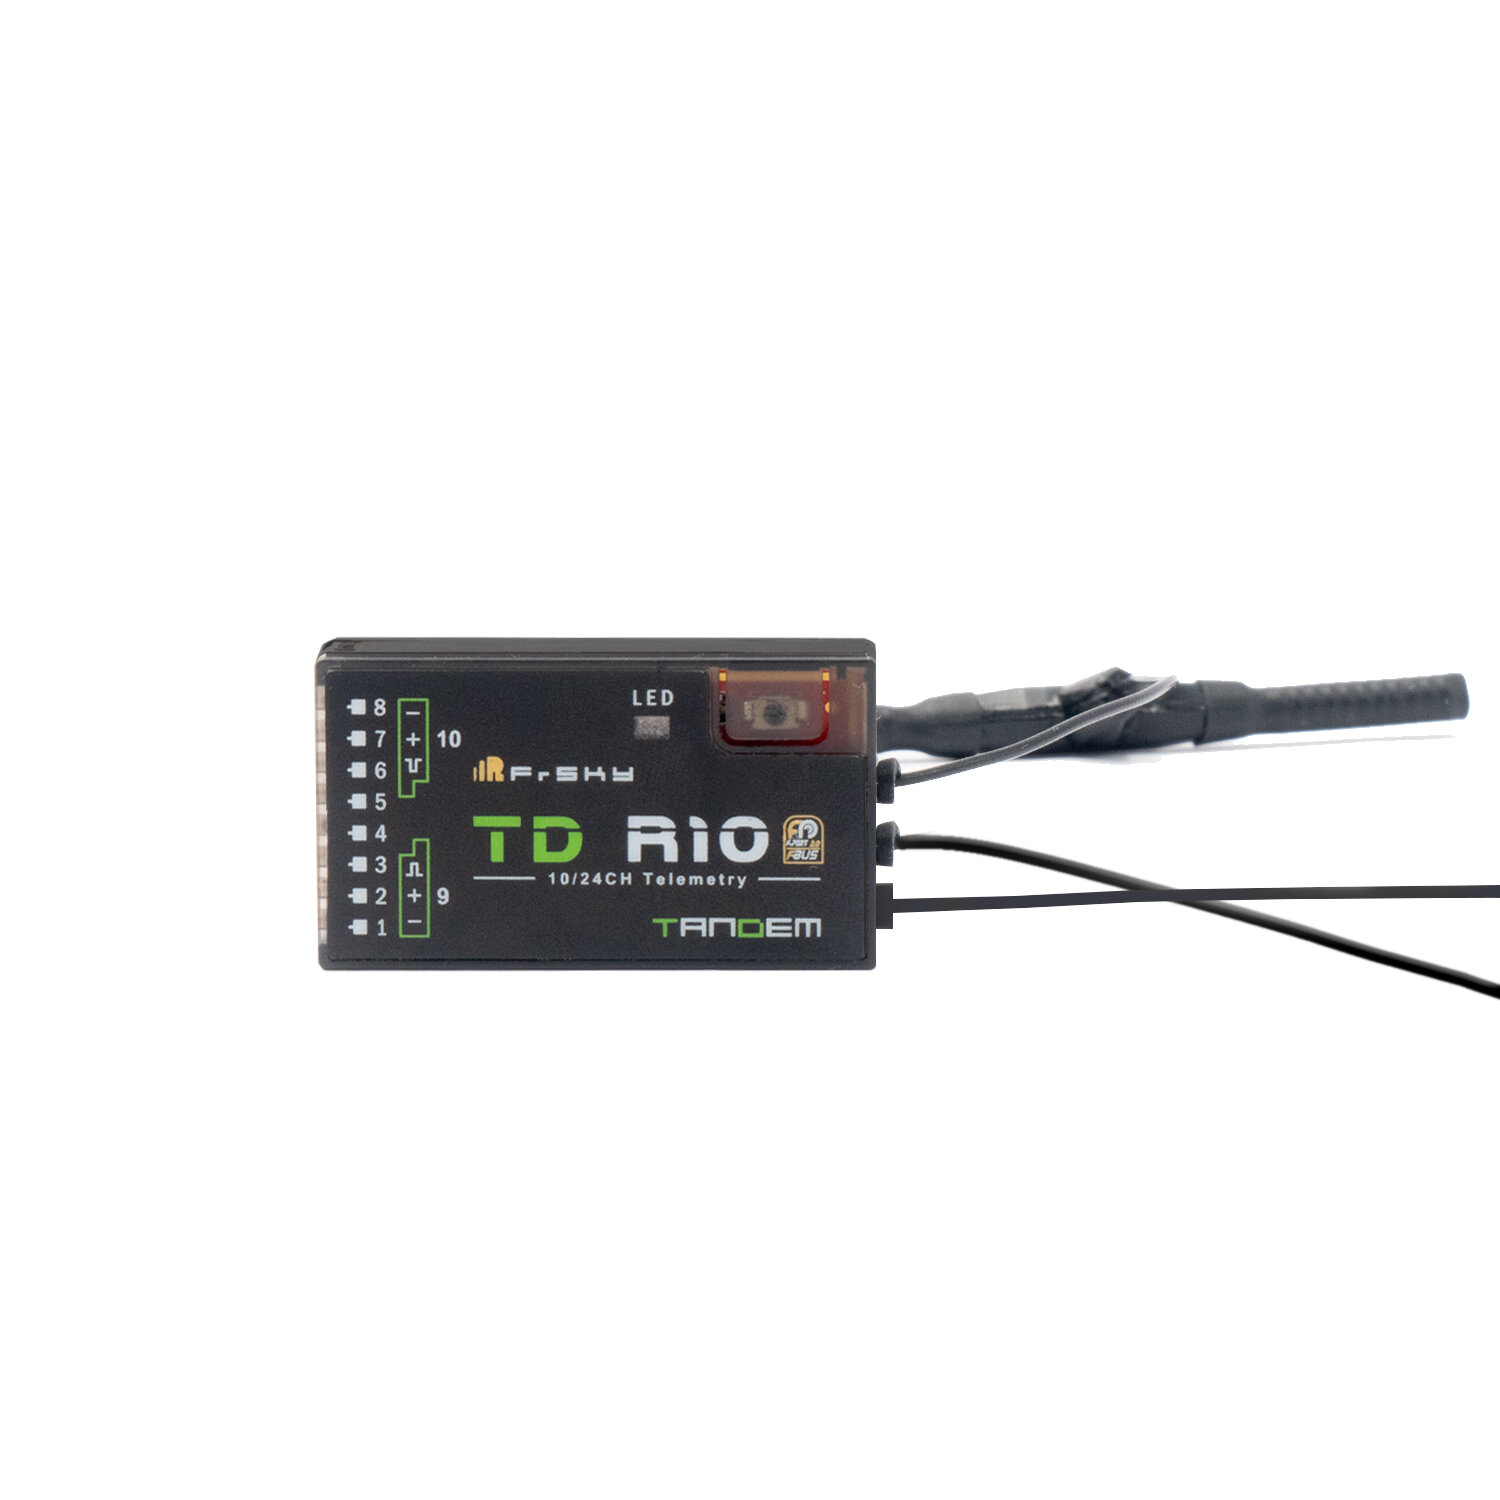 FrSky TD R10 OTA 2.4GHz 900M 10CH Tandem Dual-Band Mini RC Receiver Low Latency Long Range Built-in 